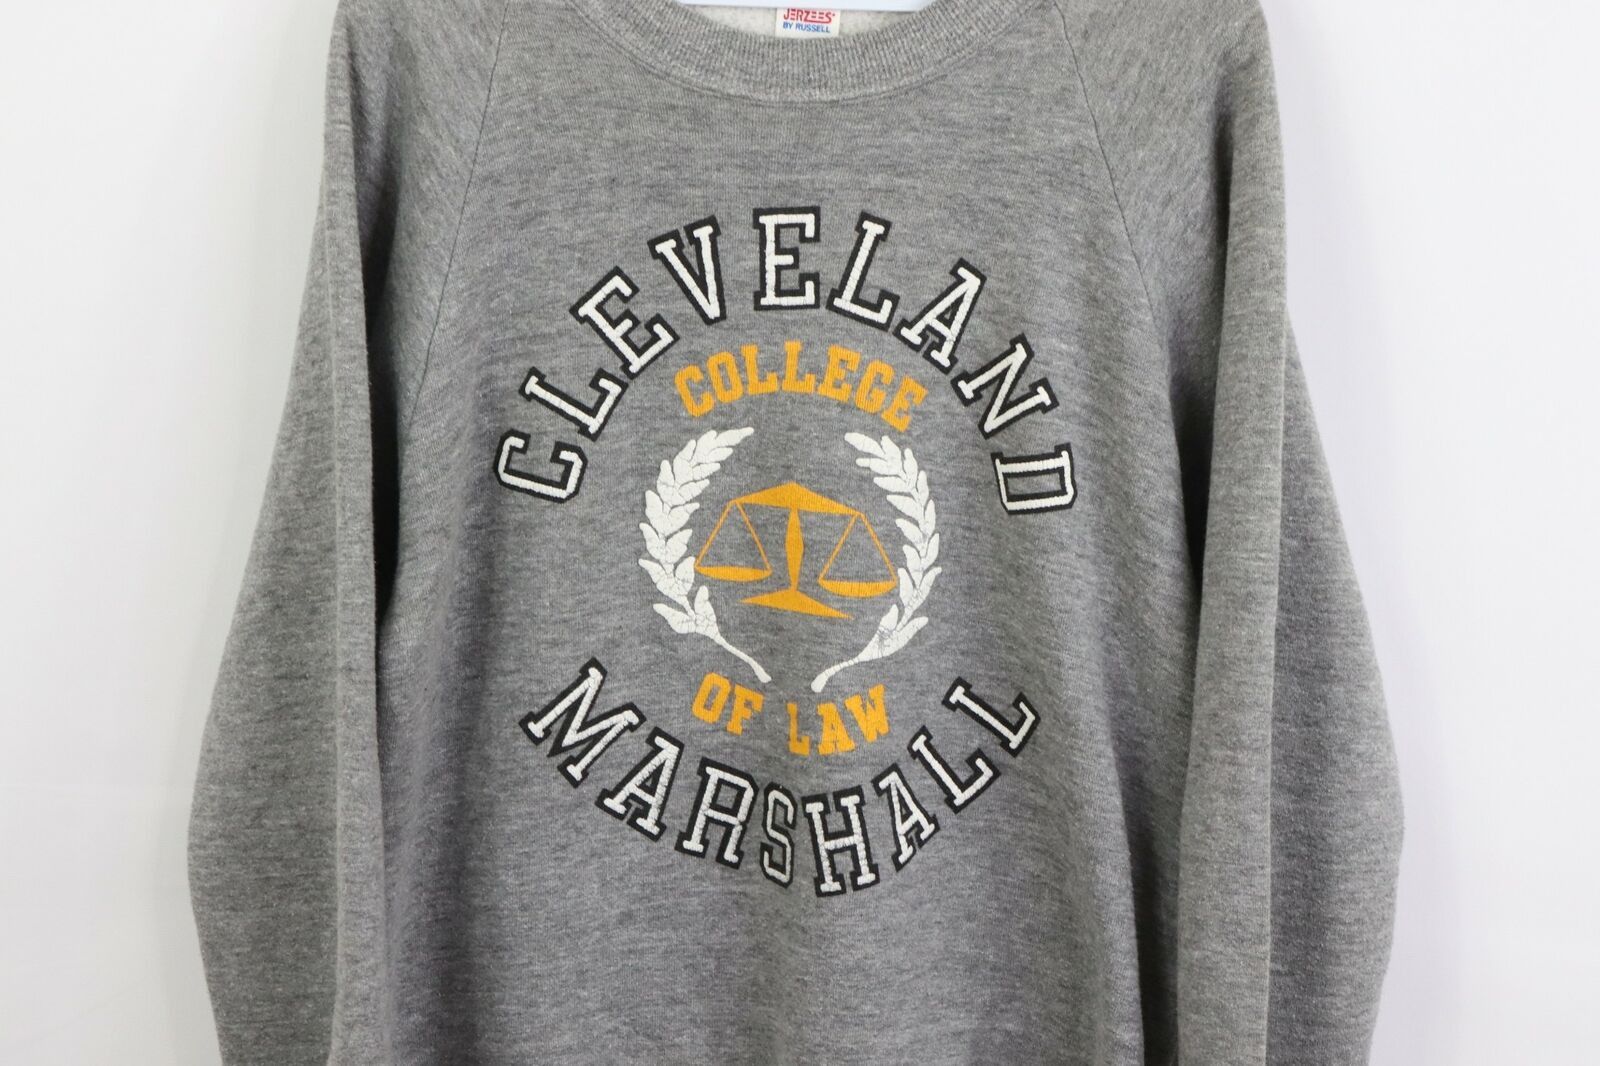 Jerzees Vintage 70s Russell Mens Cleveland Marshall Sweater Size US M / EU 48-50 / 2 - 4 Thumbnail